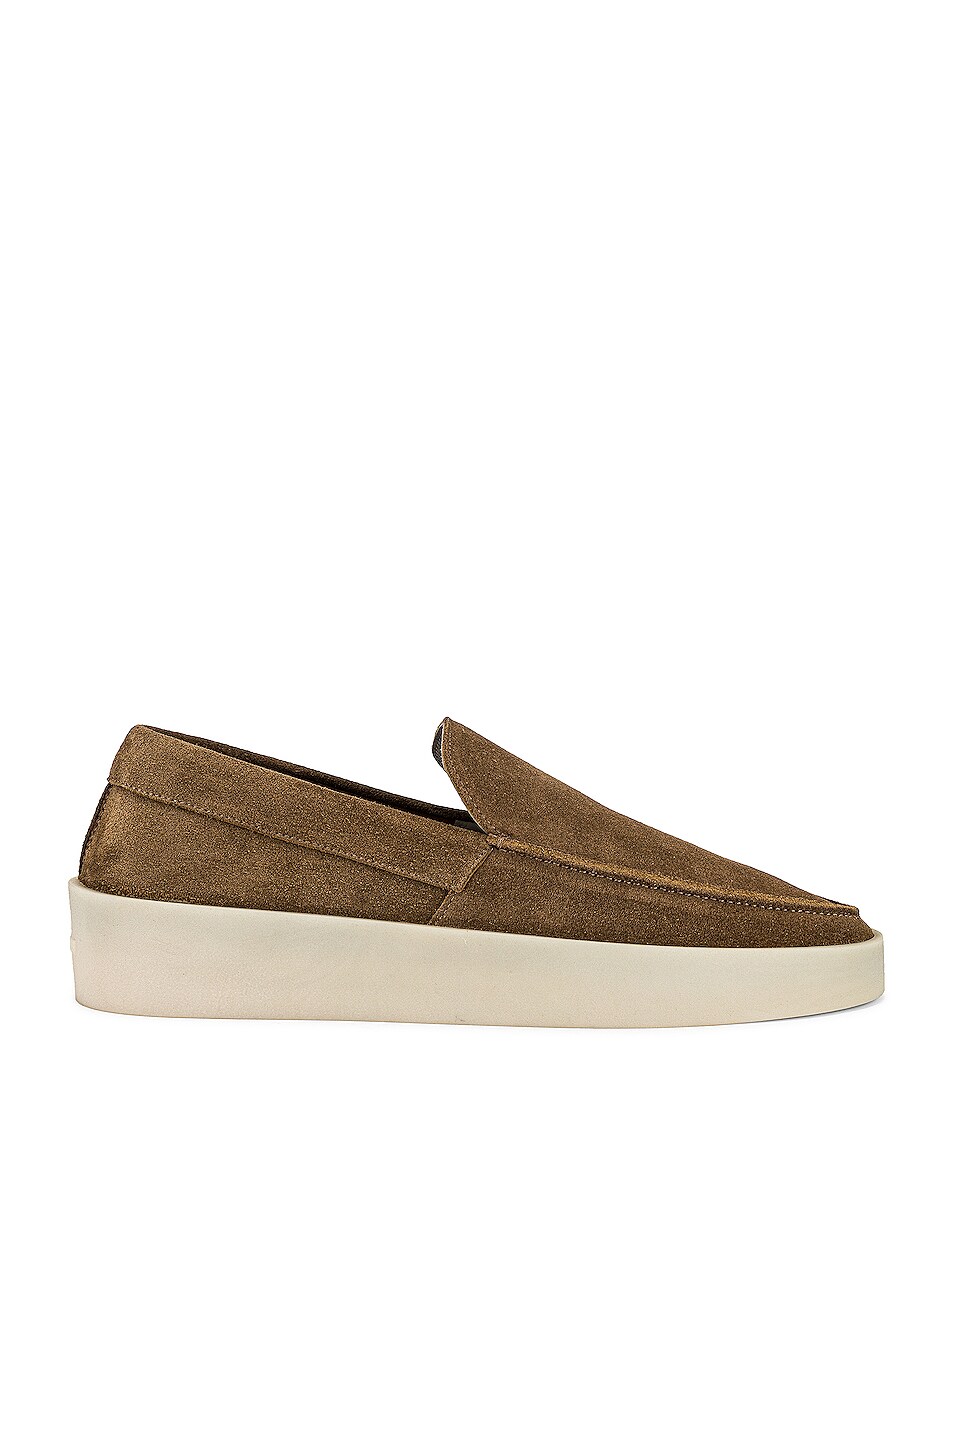 Image 1 of Fear of God Loafer in Taupe